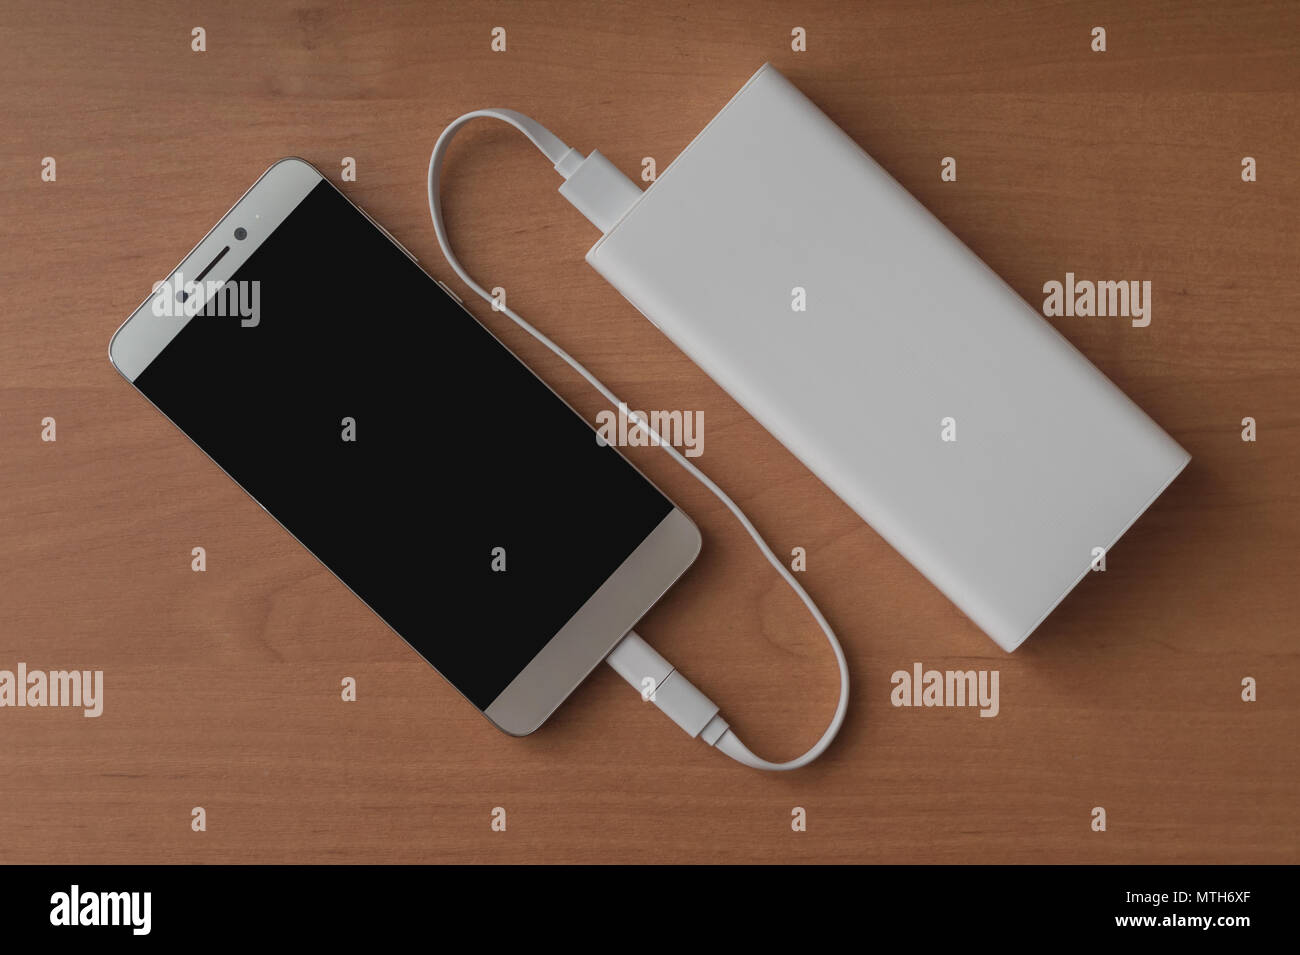 A modern smartphone and a connected power bank on a wooden background. Stock Photo